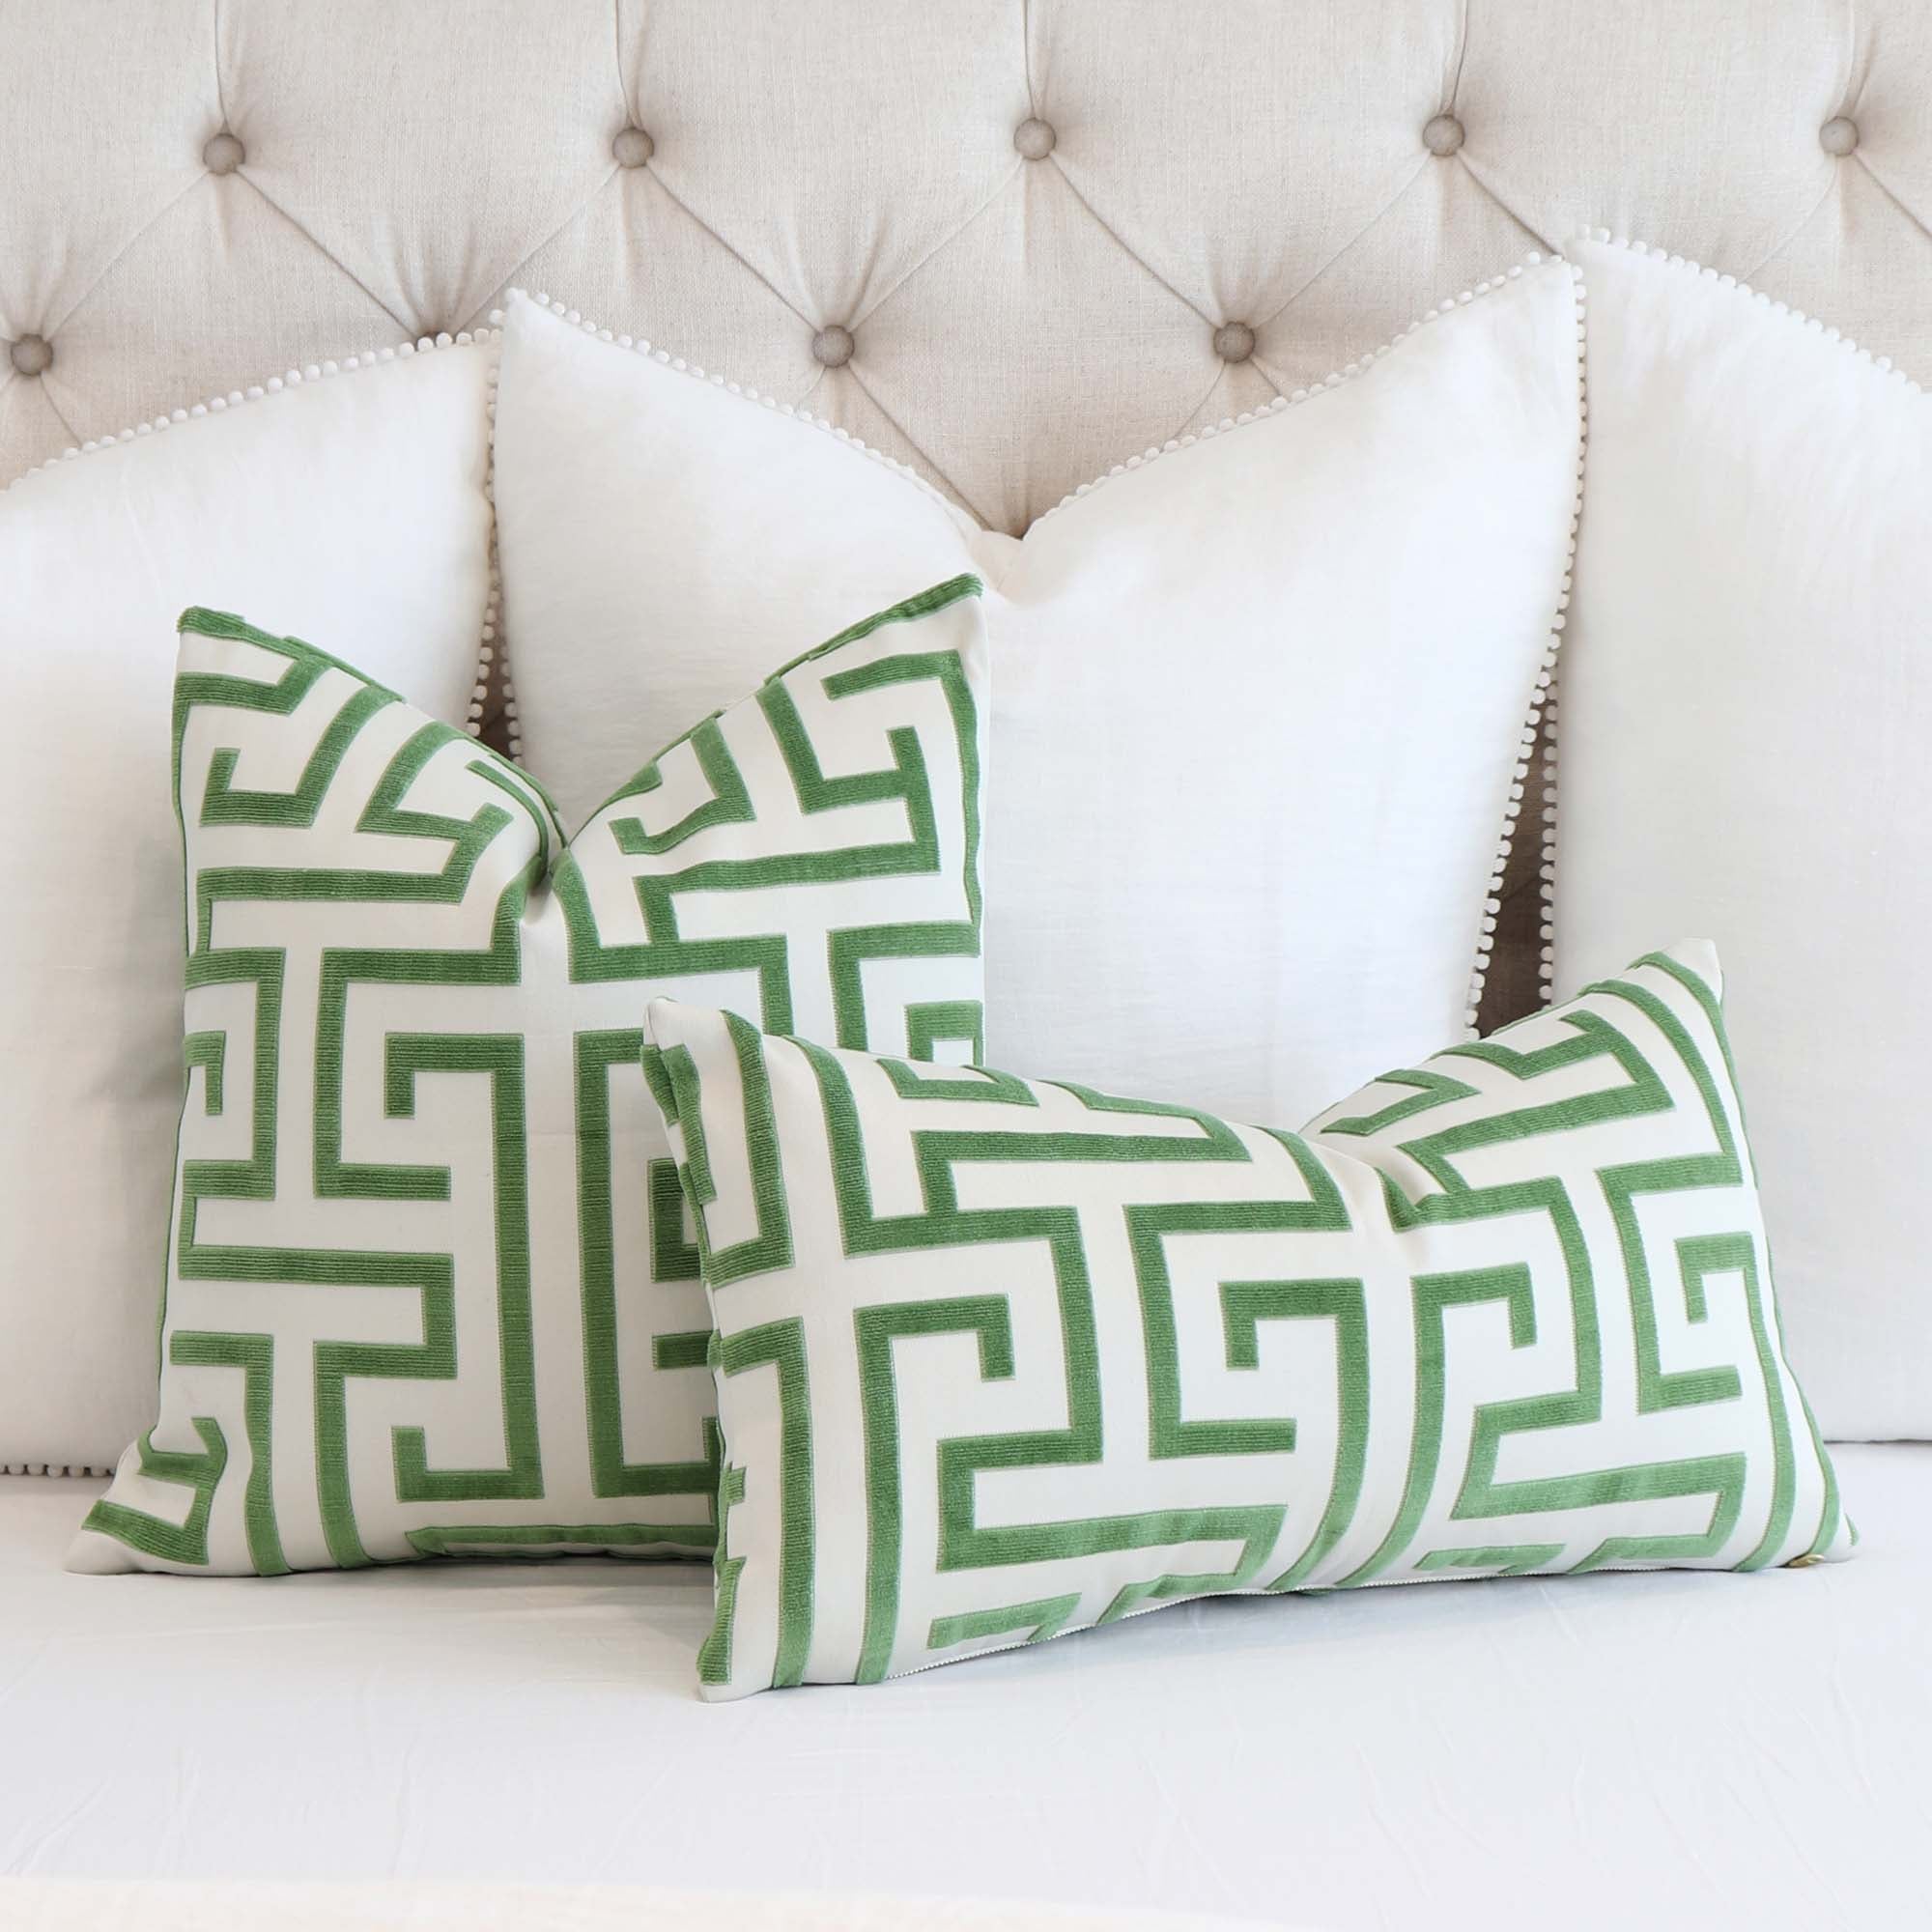 Throw Pillow Sizes: A Guide for 2023, All handmade home decor including throw  pillow covers